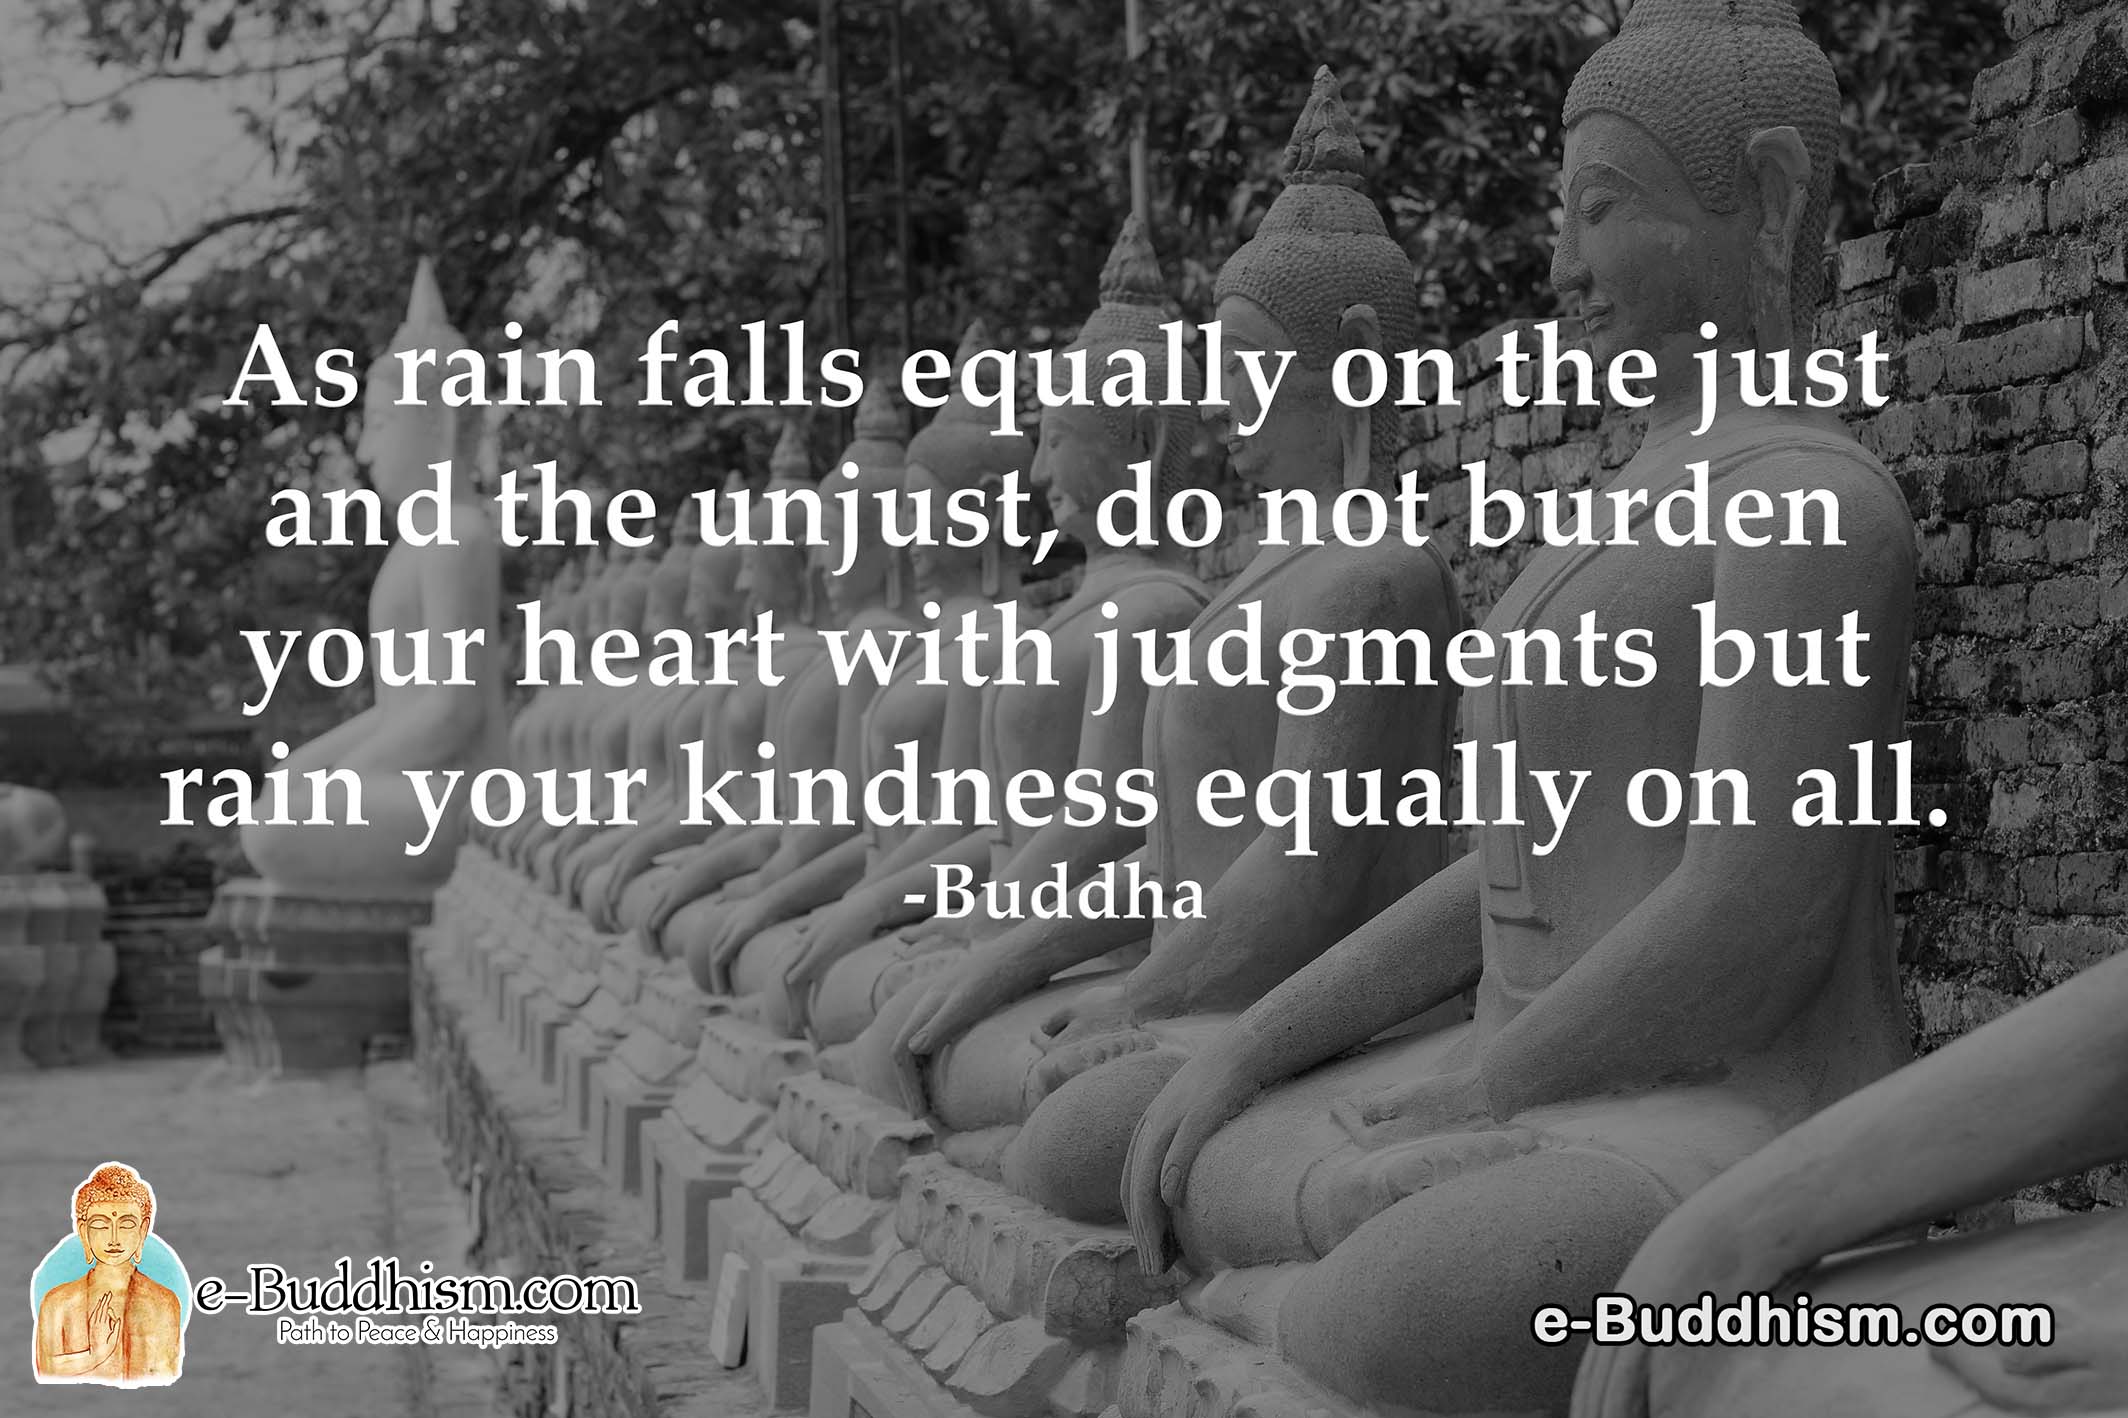 As rain falls equally on the just and the unjust, do not burden your heart with judgements but rain your kindness equally on all. -Buddha